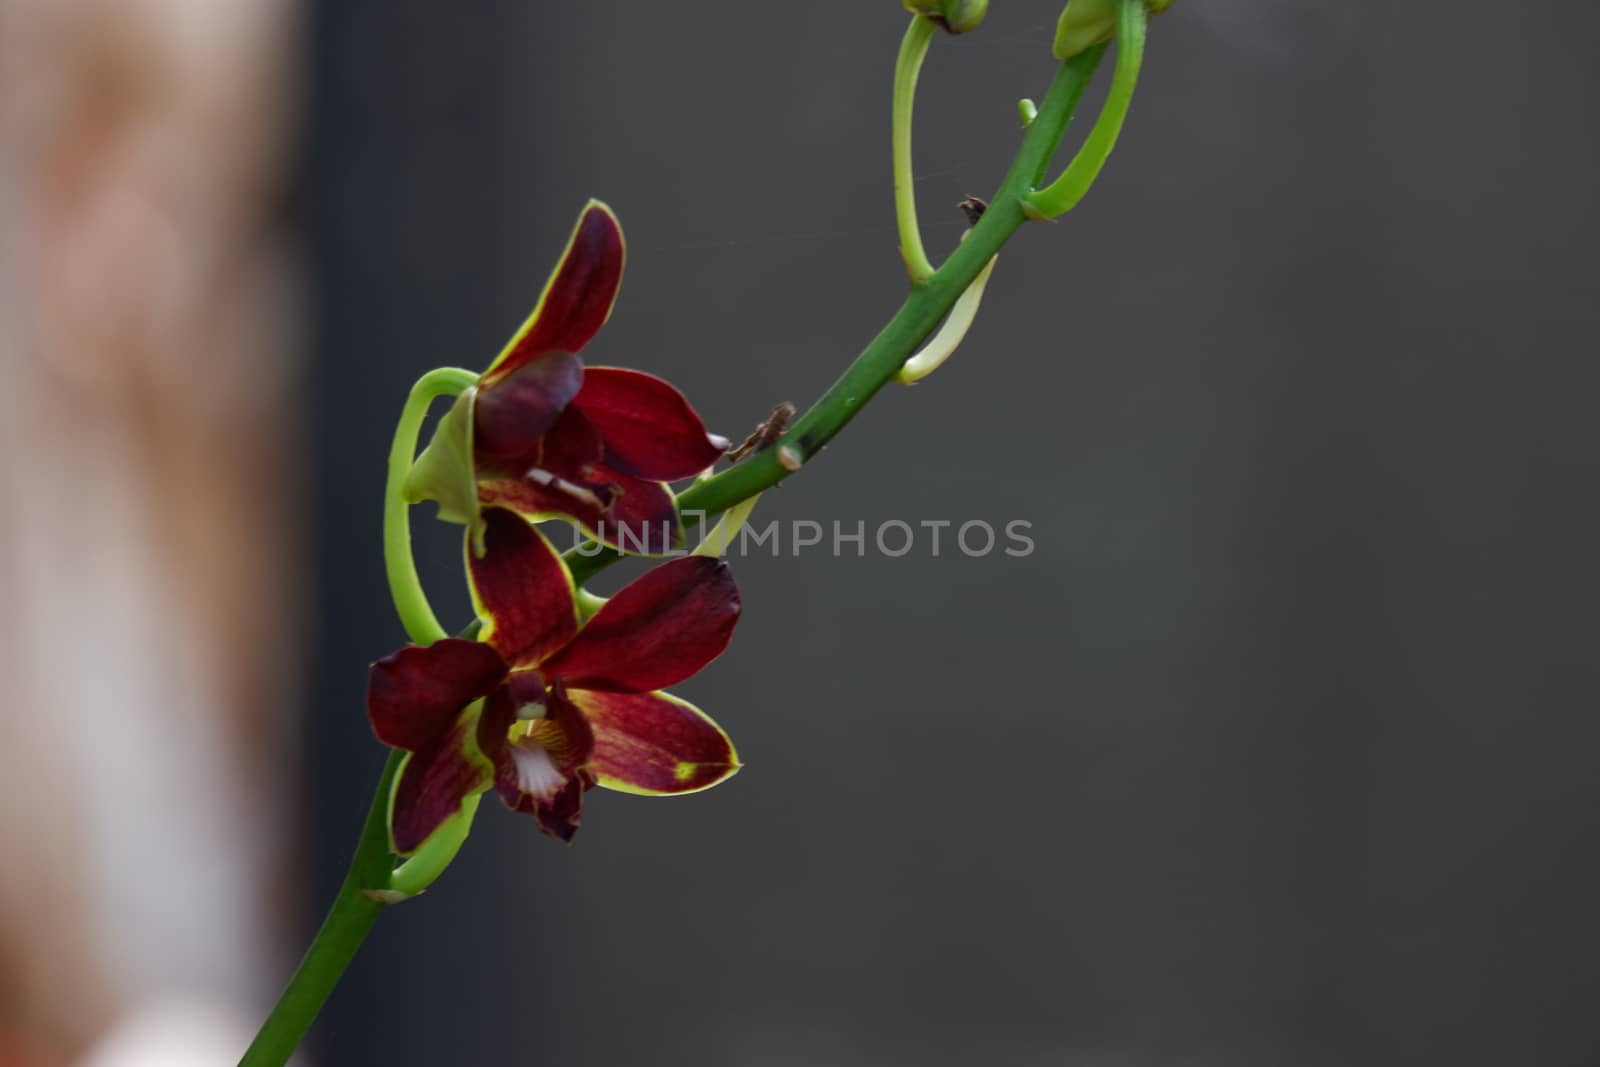 close up image of beautiful dendrobium mangosteen in full bloom has a velvety maroon red color like mangosteen planted in the garden in the garden isolated blur background